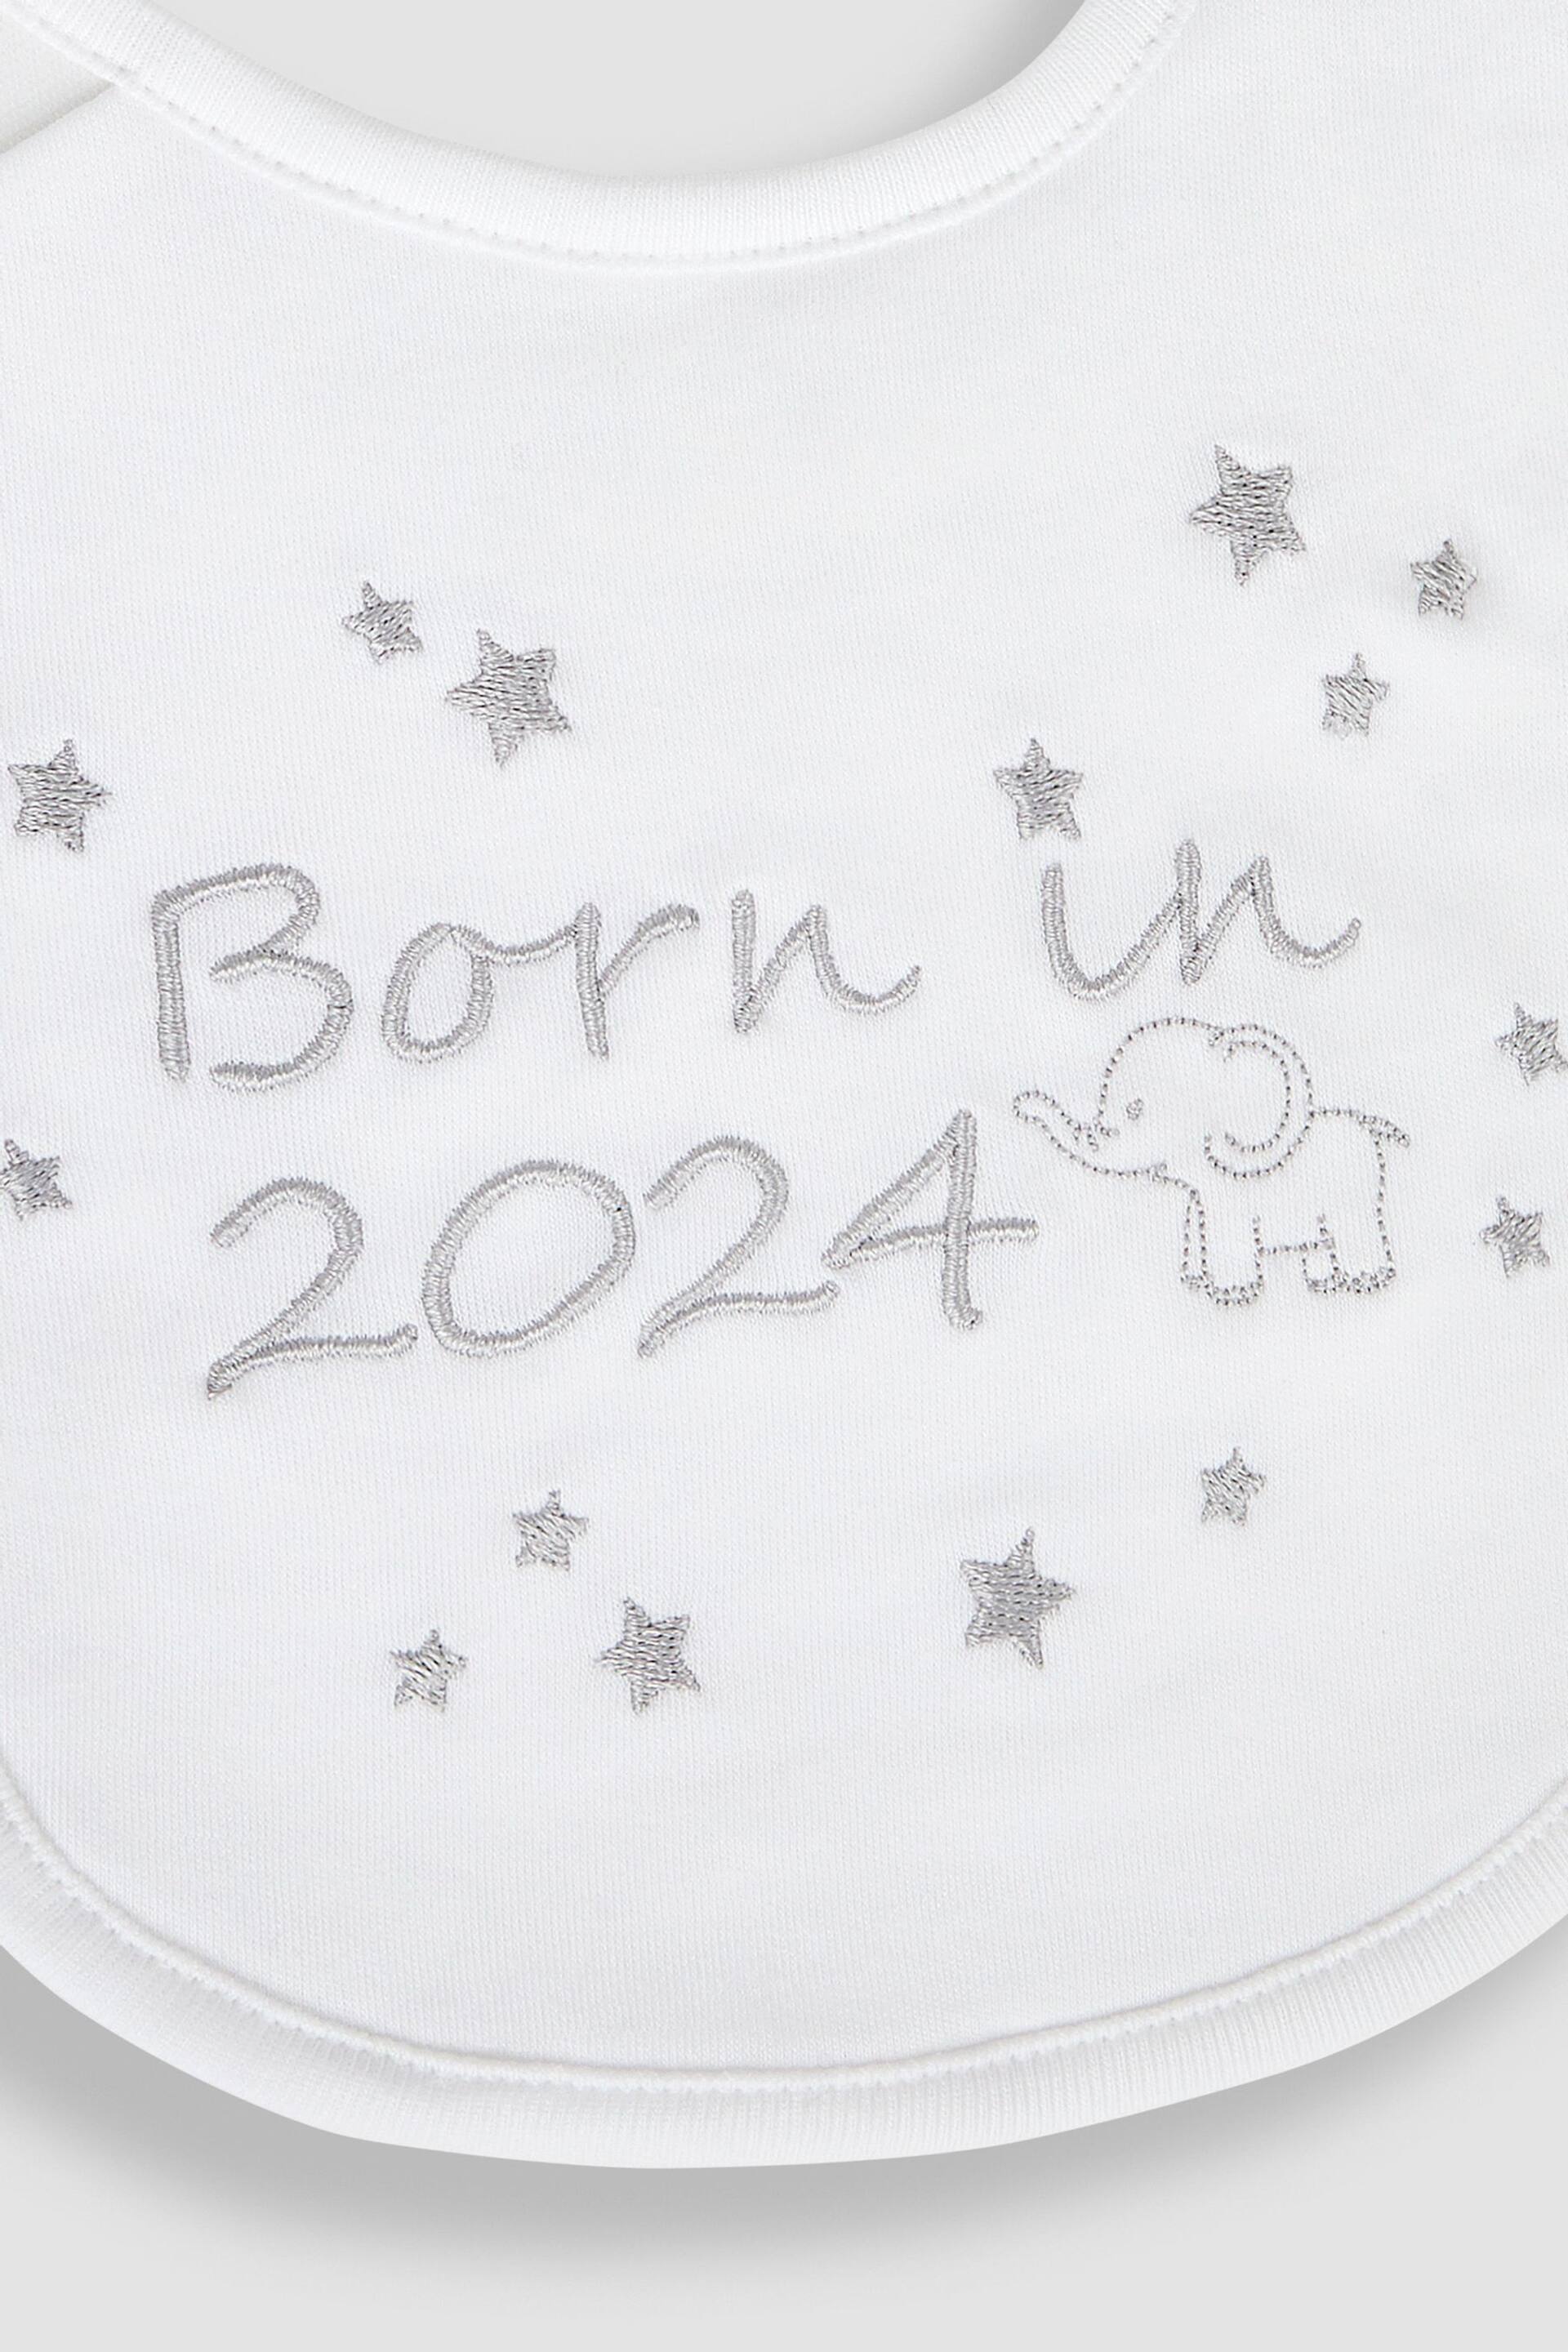 JoJo Maman Bébé White Born in 2024 Embroidered Bibs - Image 3 of 3